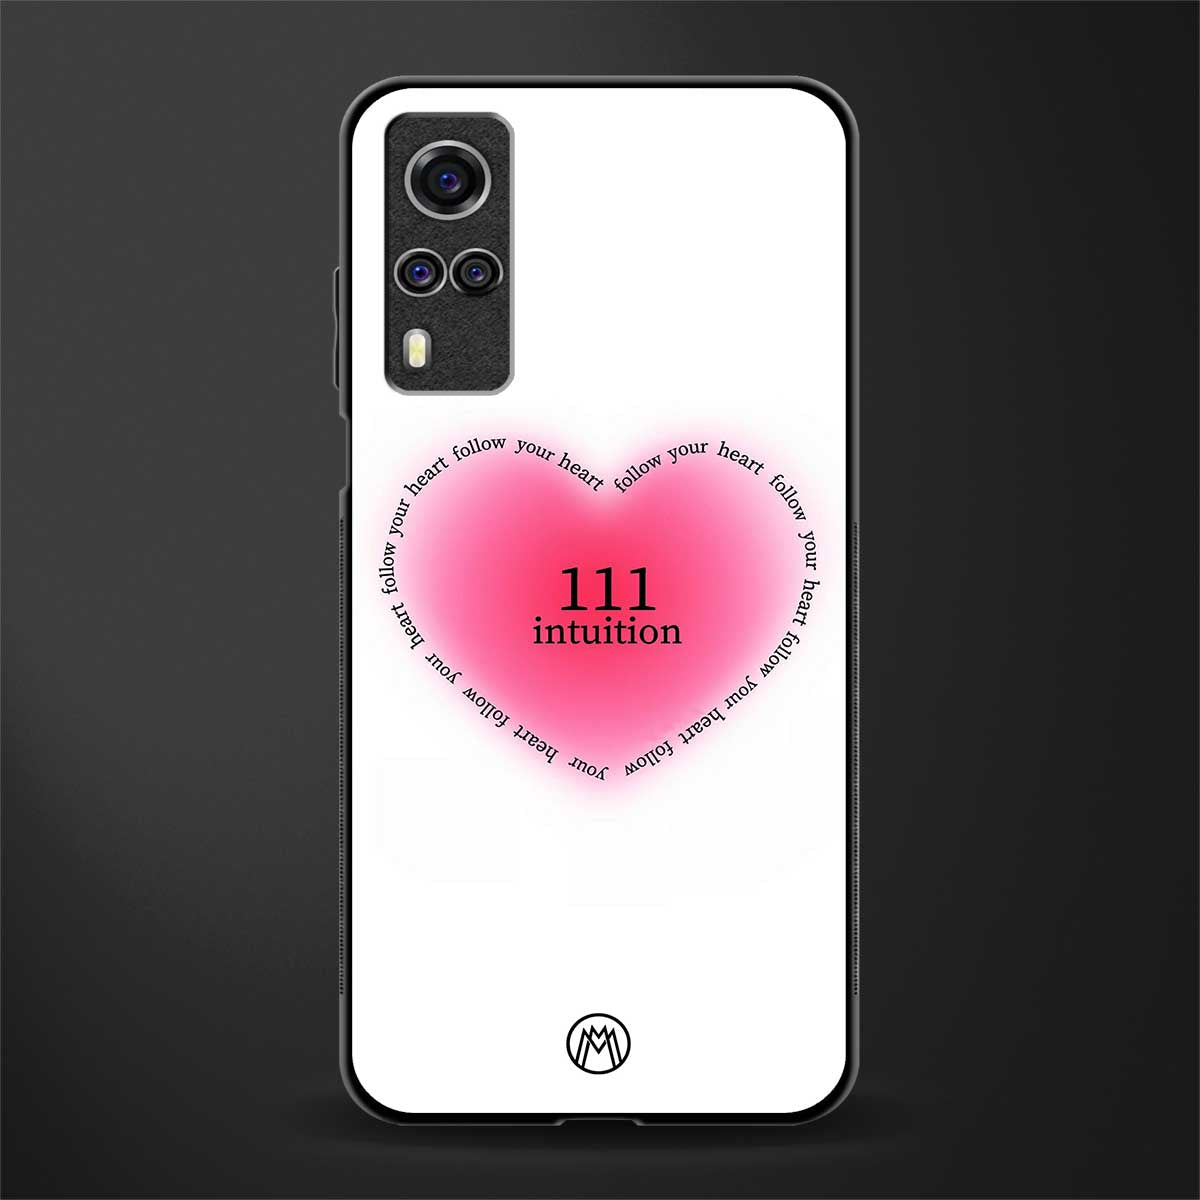 111 intuition glass case for vivo y53s image